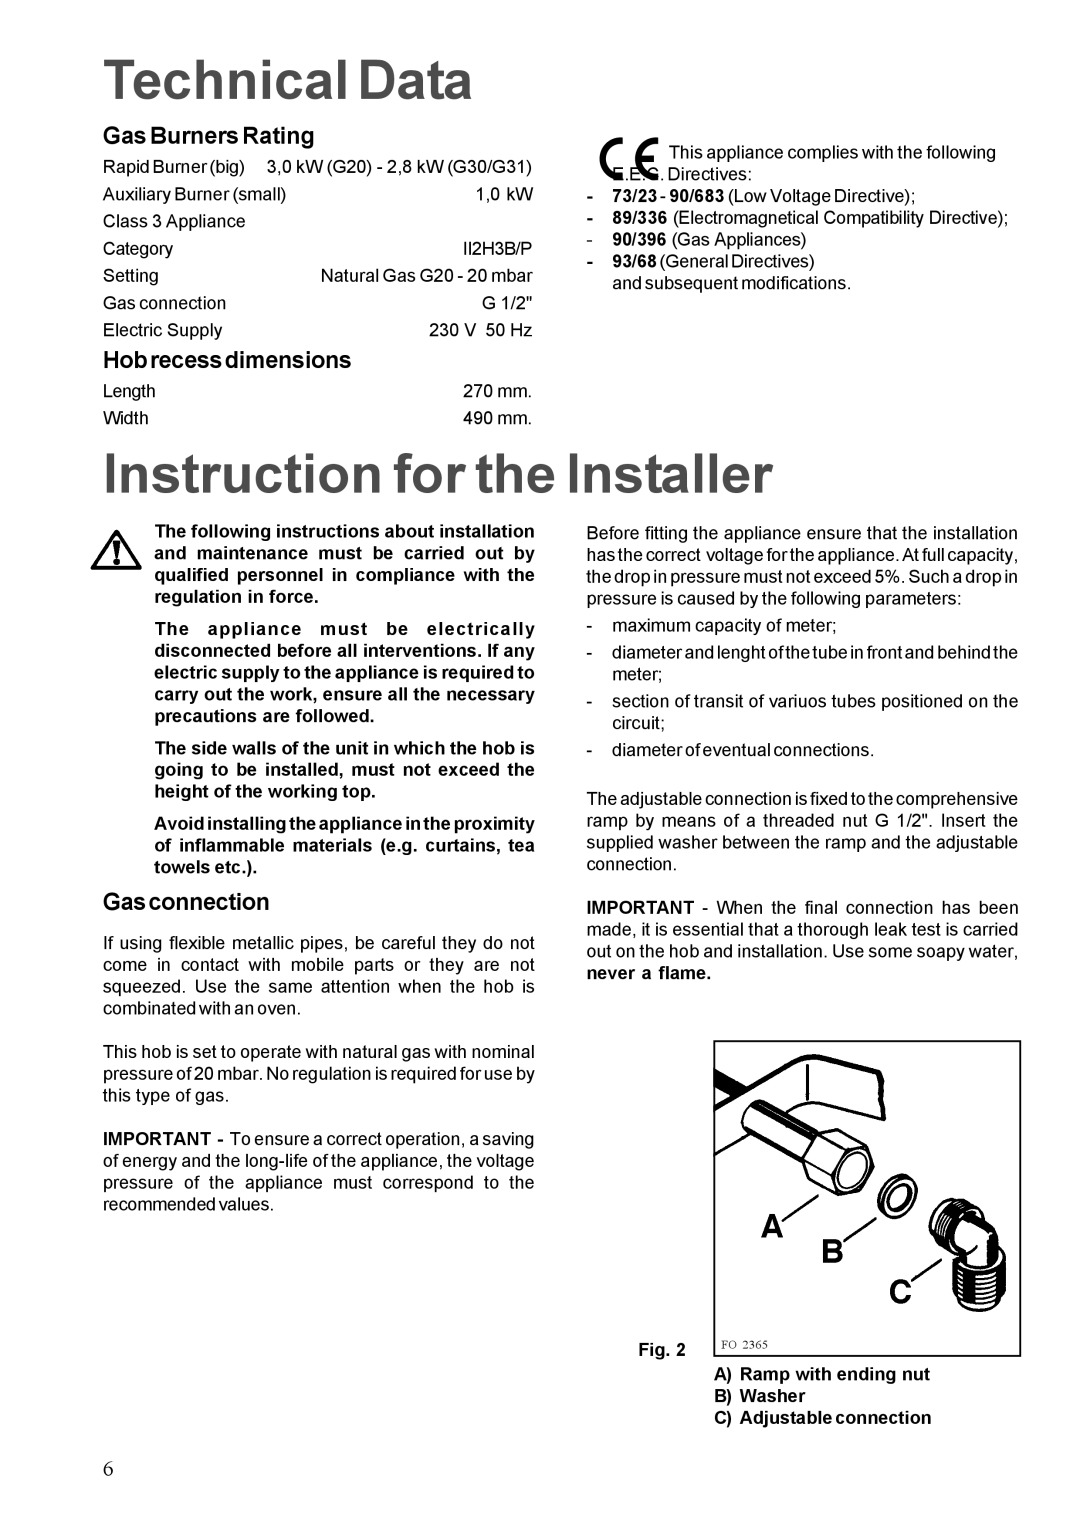 Electrolux EHGT326X Technical Data, Instruction for the Installer, Gas Burners Rating, Hobrecessdimensions, Gasconnection 